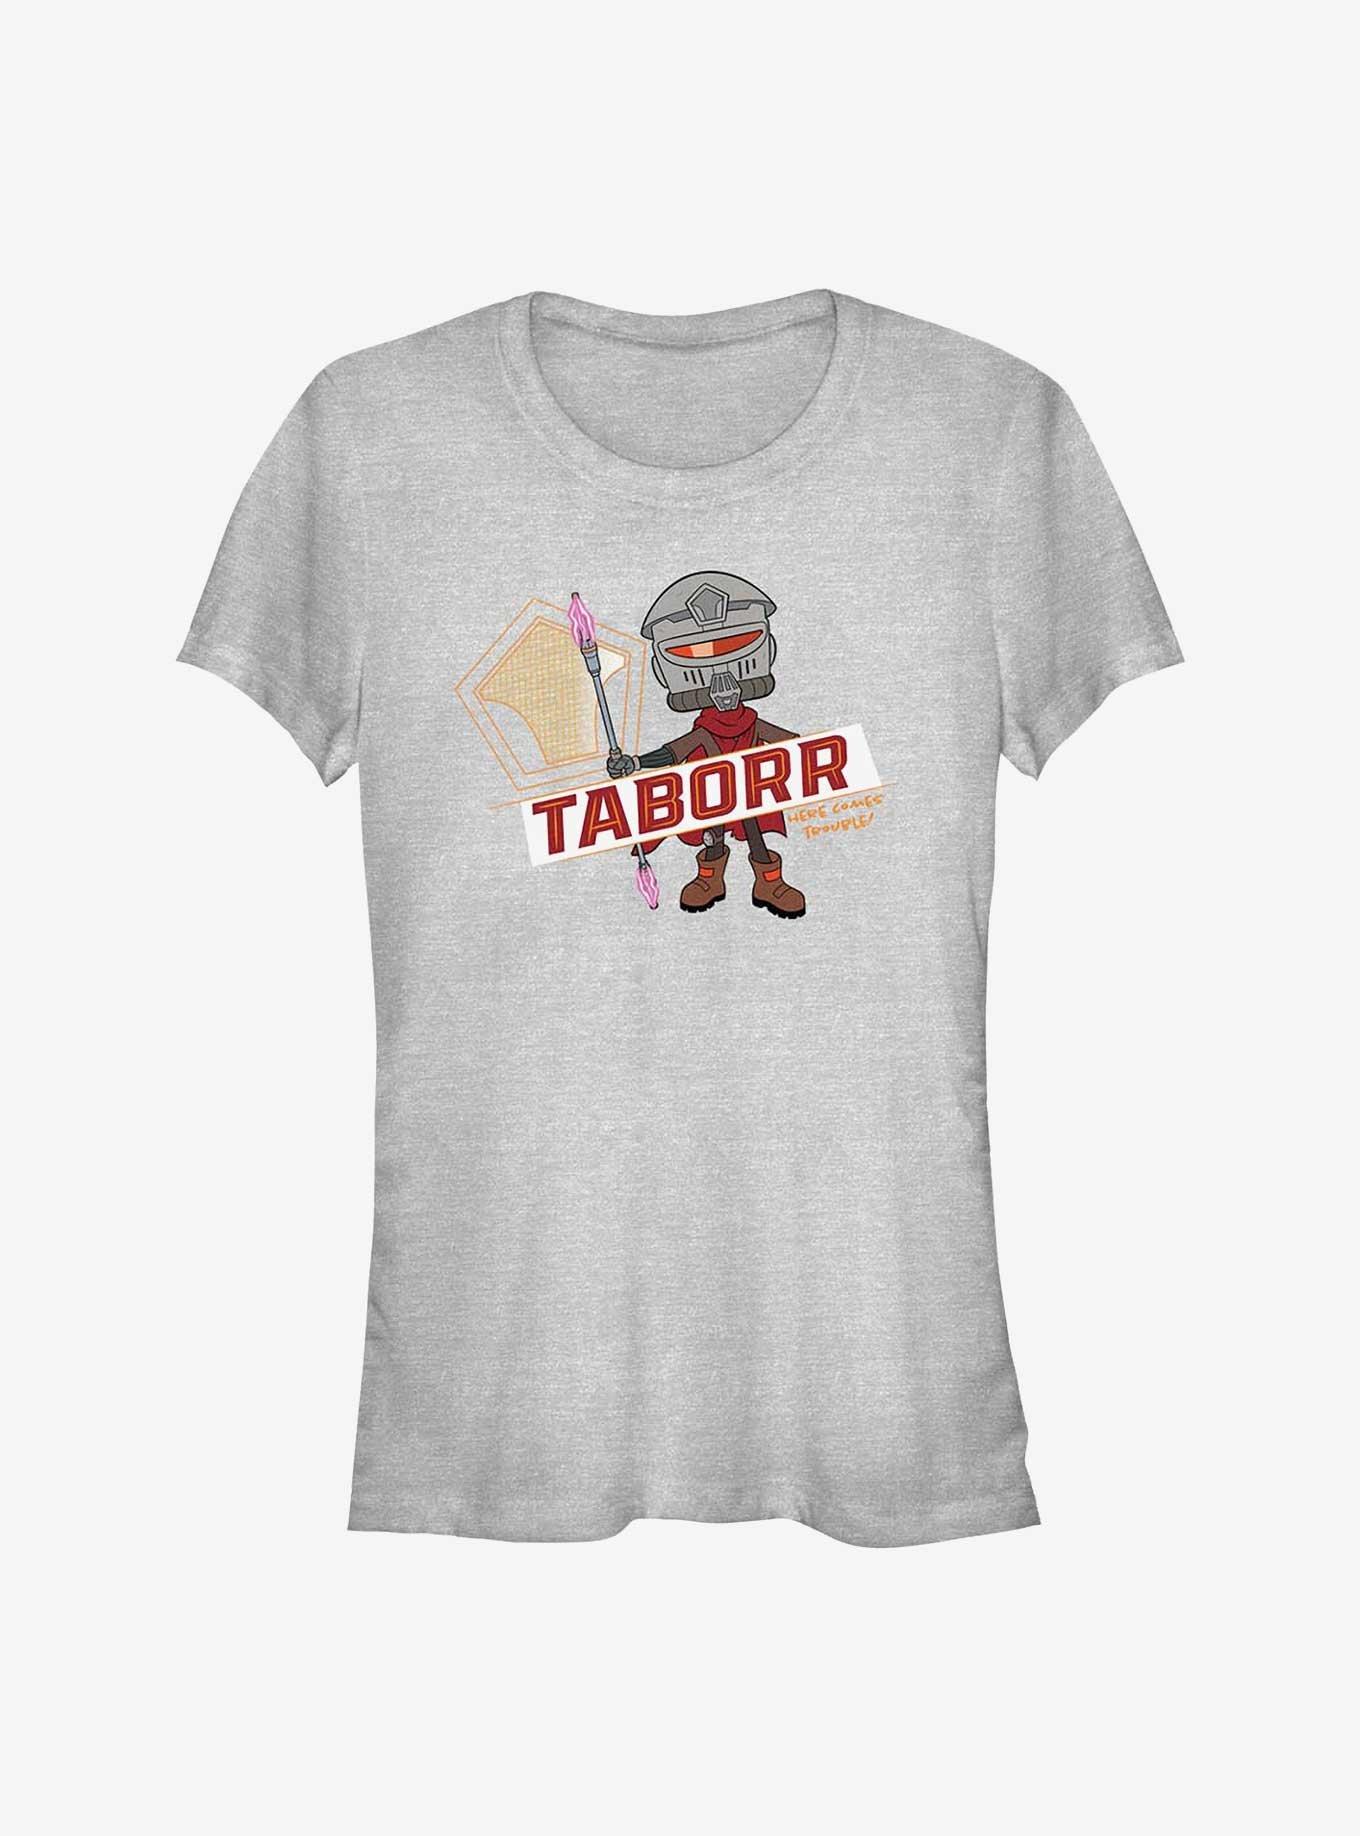 Star Wars: Young Jedi Adventures Taborr Here Comes Trouble Girls T-Shirt, , hi-res